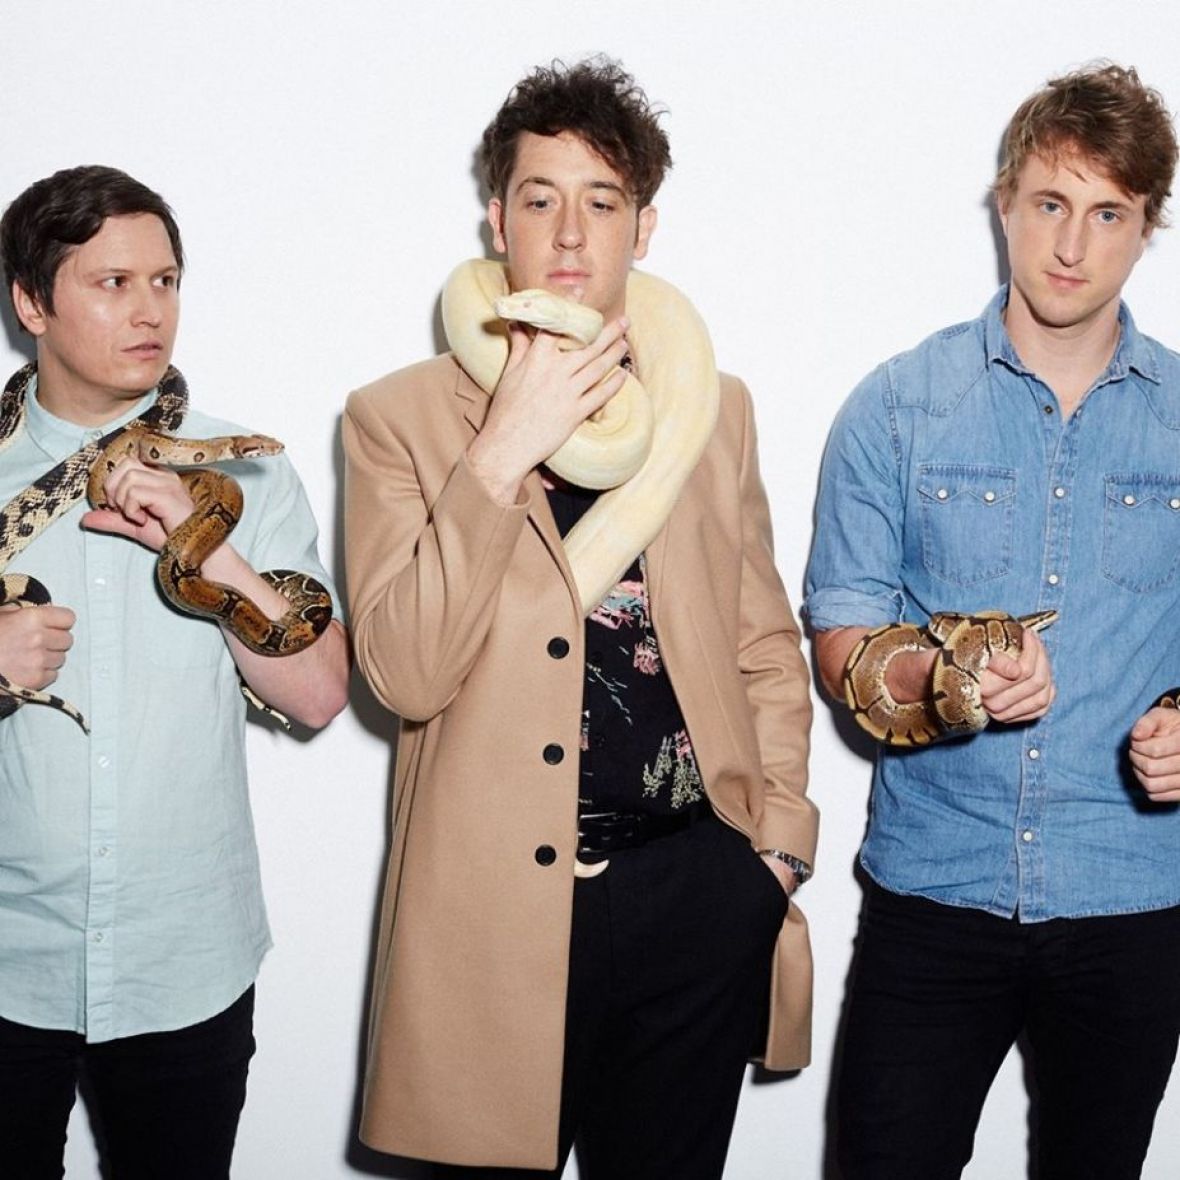 0/The Wombats